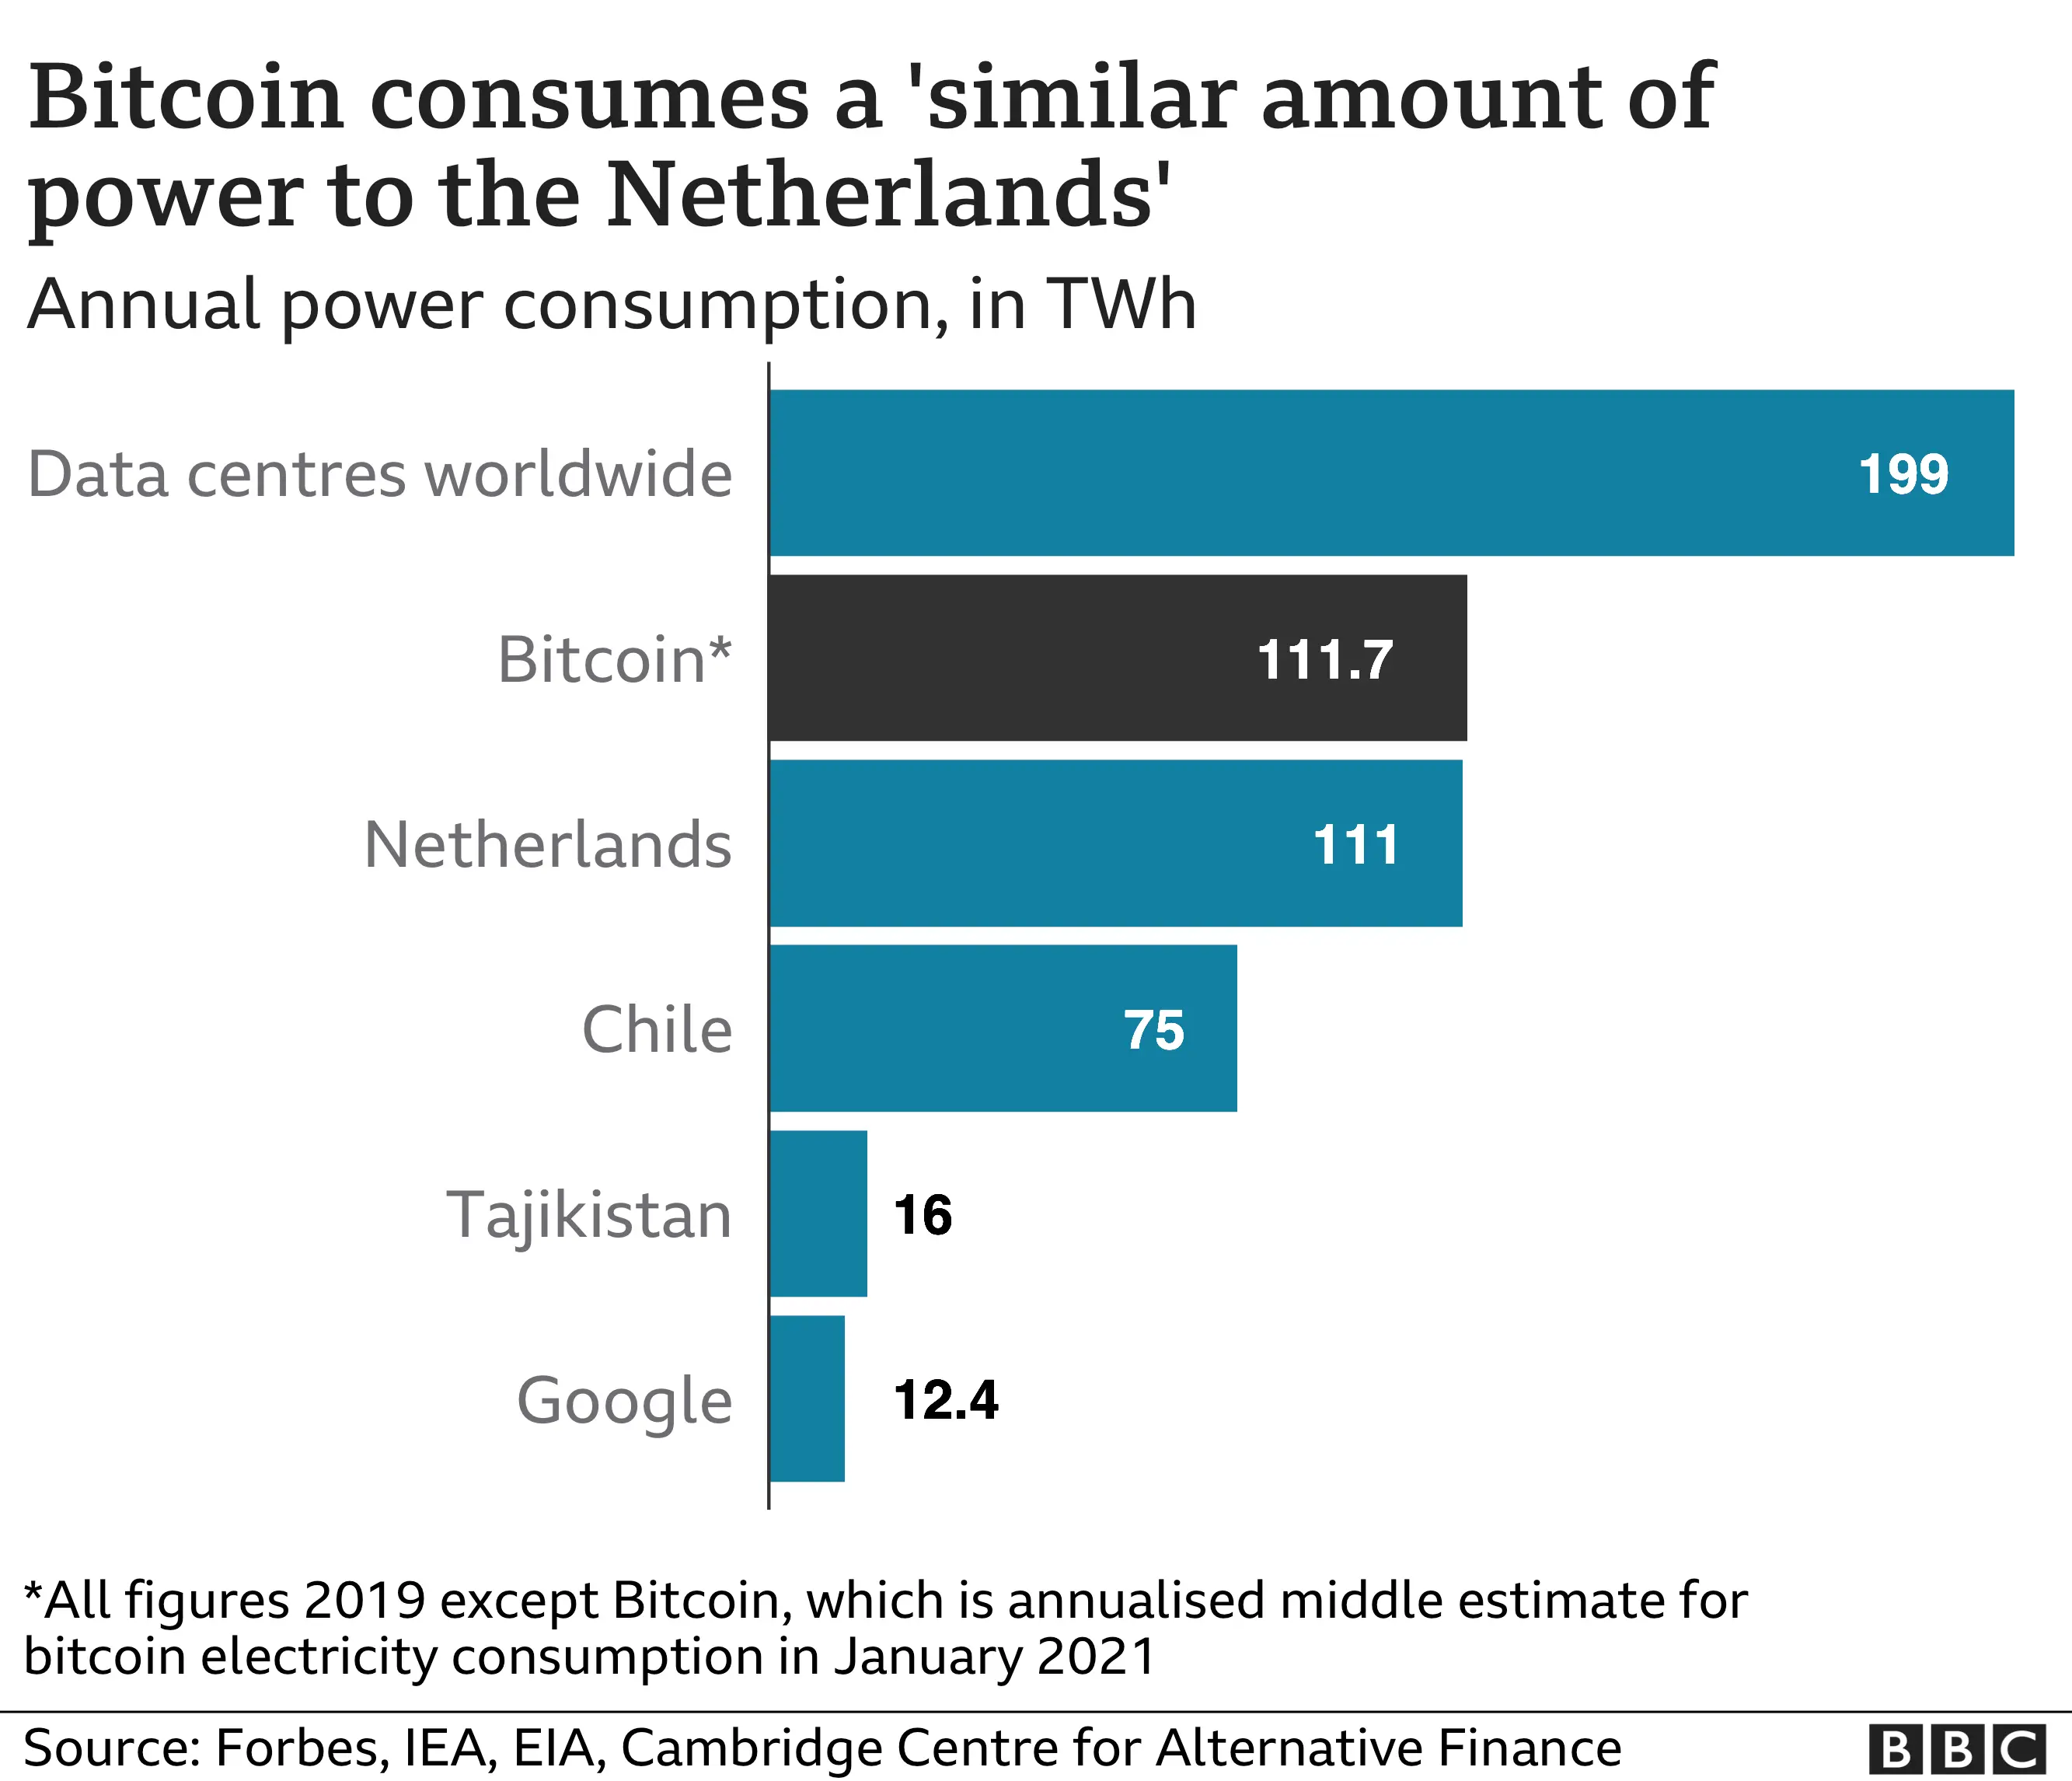 Bitcoin consumes a similar amount of power to the Netherlands